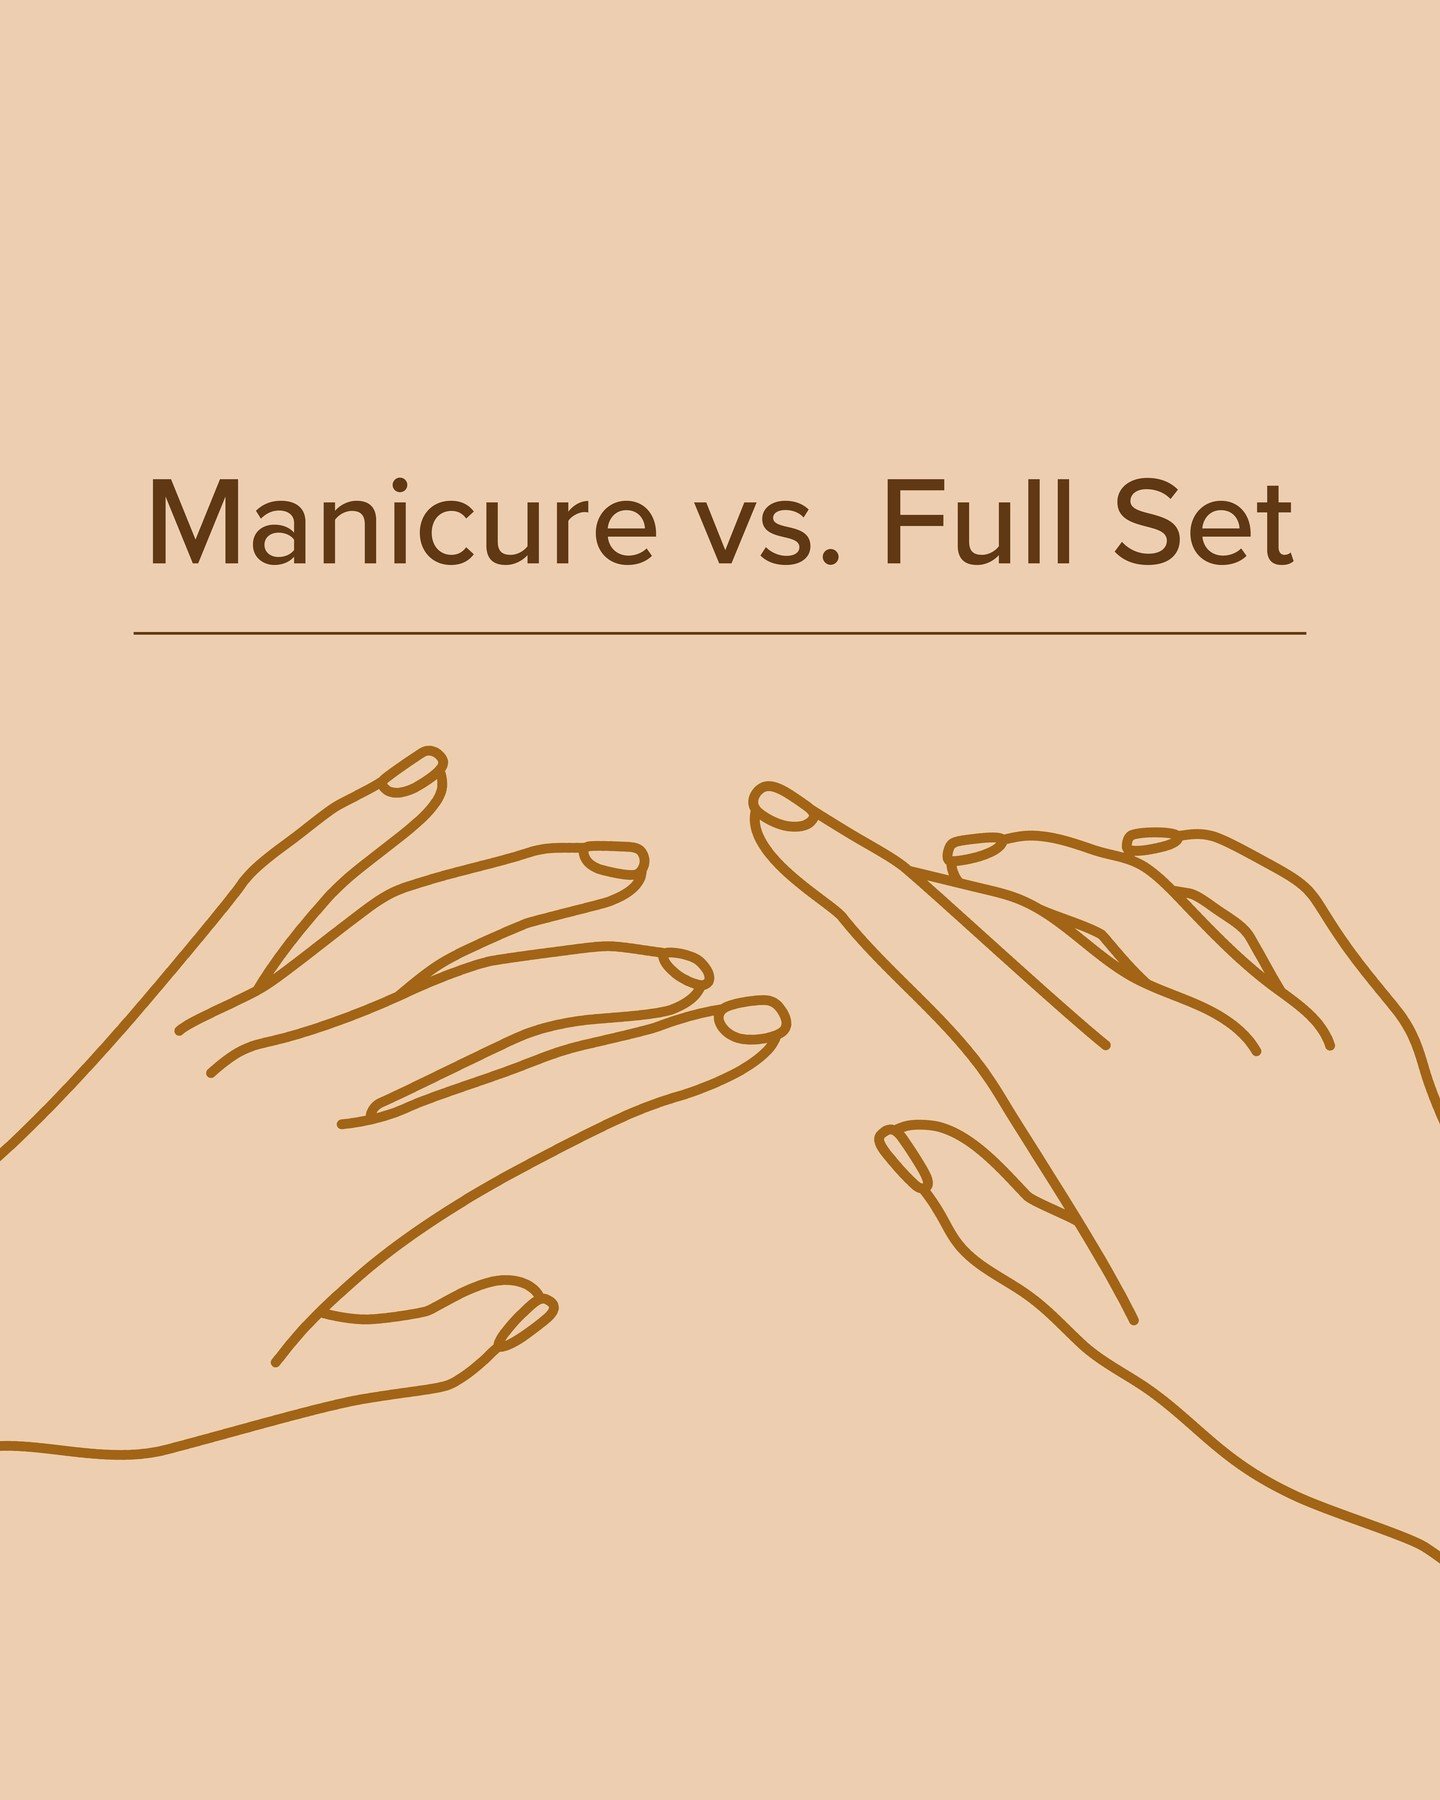 Let's talk about manicure services!

It can be confusing when you don't know which service to book. In general, a basic manicure service includes nail treatments and polish on natural nails, while a Full Set includes the application of nail extension